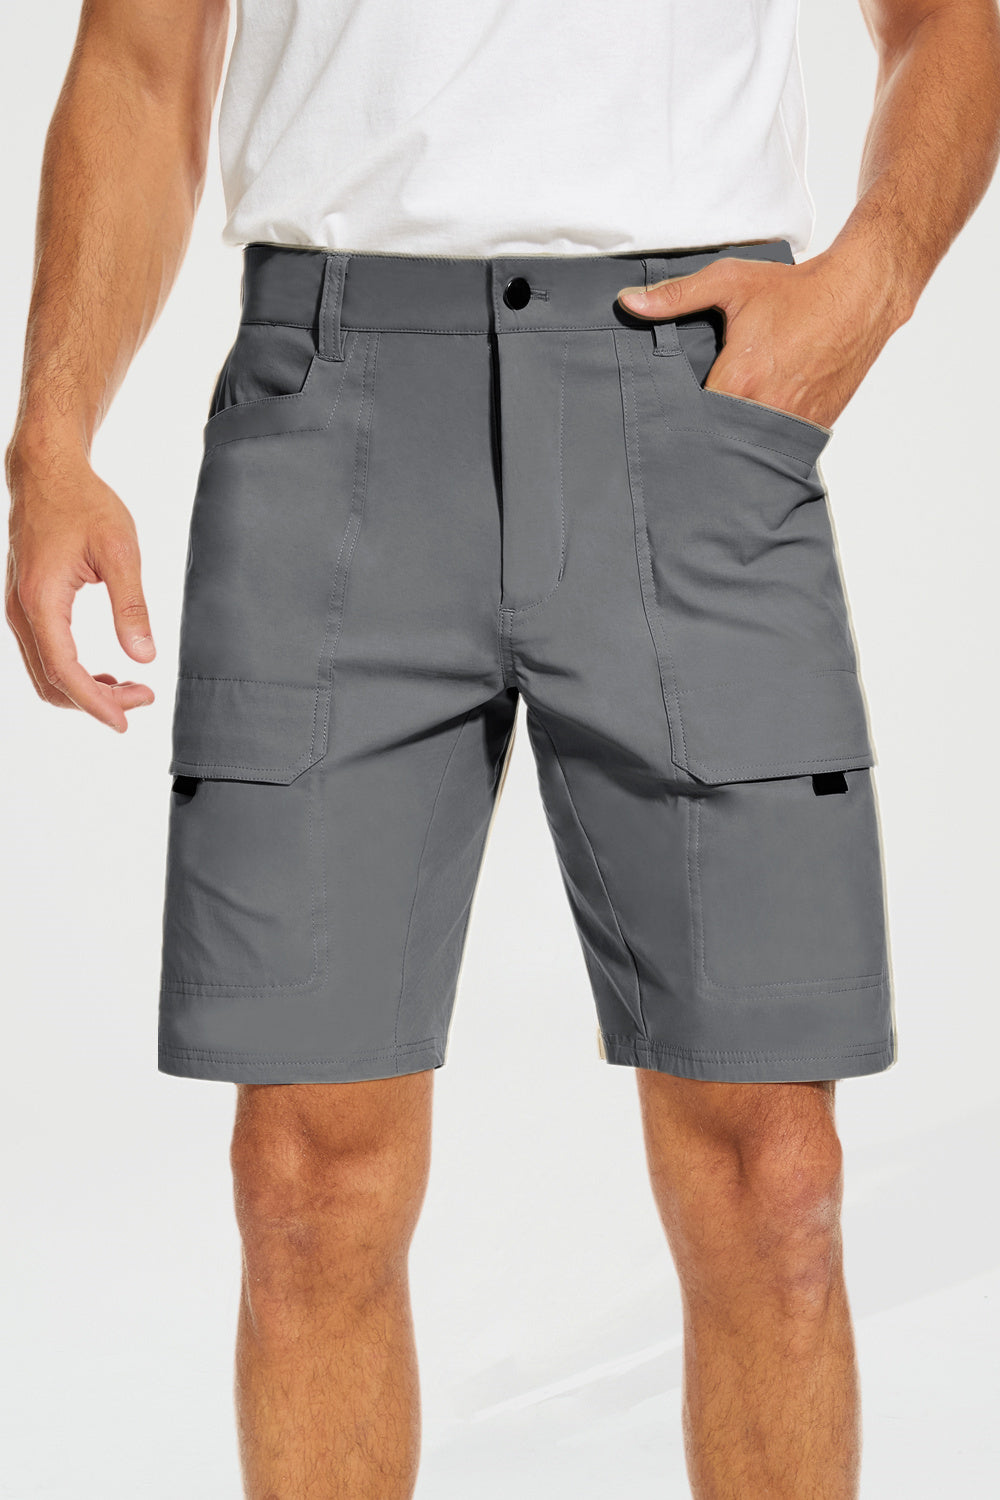 HSMQHJWE Mens Sweat Shorts With Pockets Tearaway Shorts Male Fashion Casual  Solid Color Multi Pocket Zipper Buckle Outdoor Shorts Tooling Shorts 10  Memory Foam 